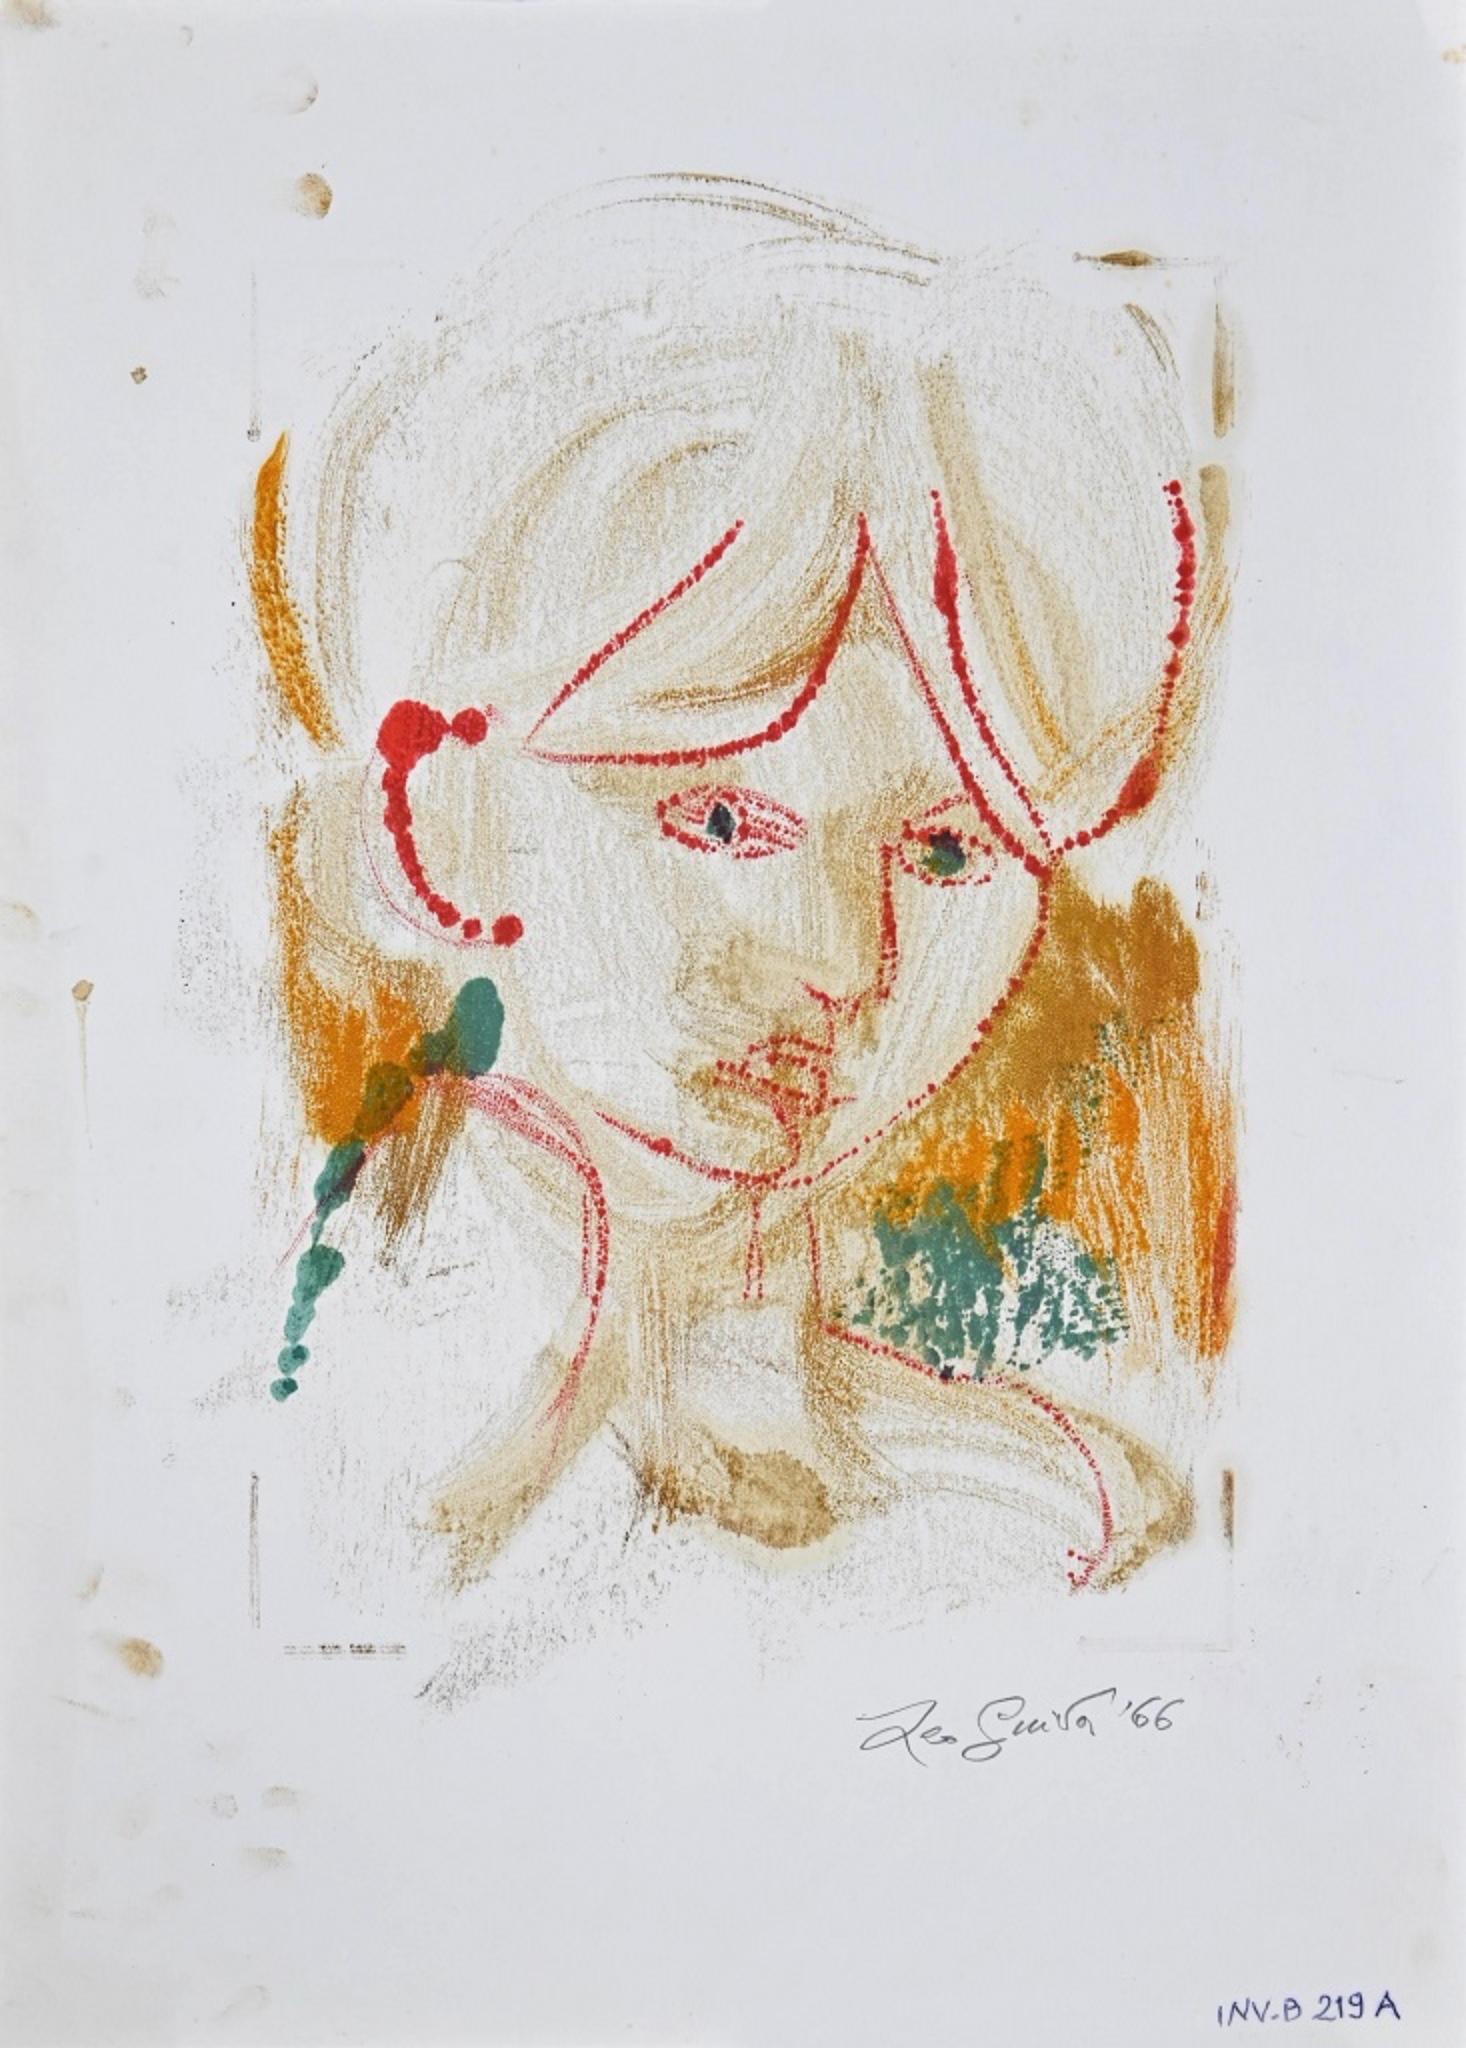 Female Portrait is an original Contemporary artwork realized in 1966 by the italian artist Leo Guida.

Hand-signed and dated in pencil on the lower right corner: Leo Guida '66. 

Original Lithograph on paper.   Image Dimensions: 32 x 0.1 x 22